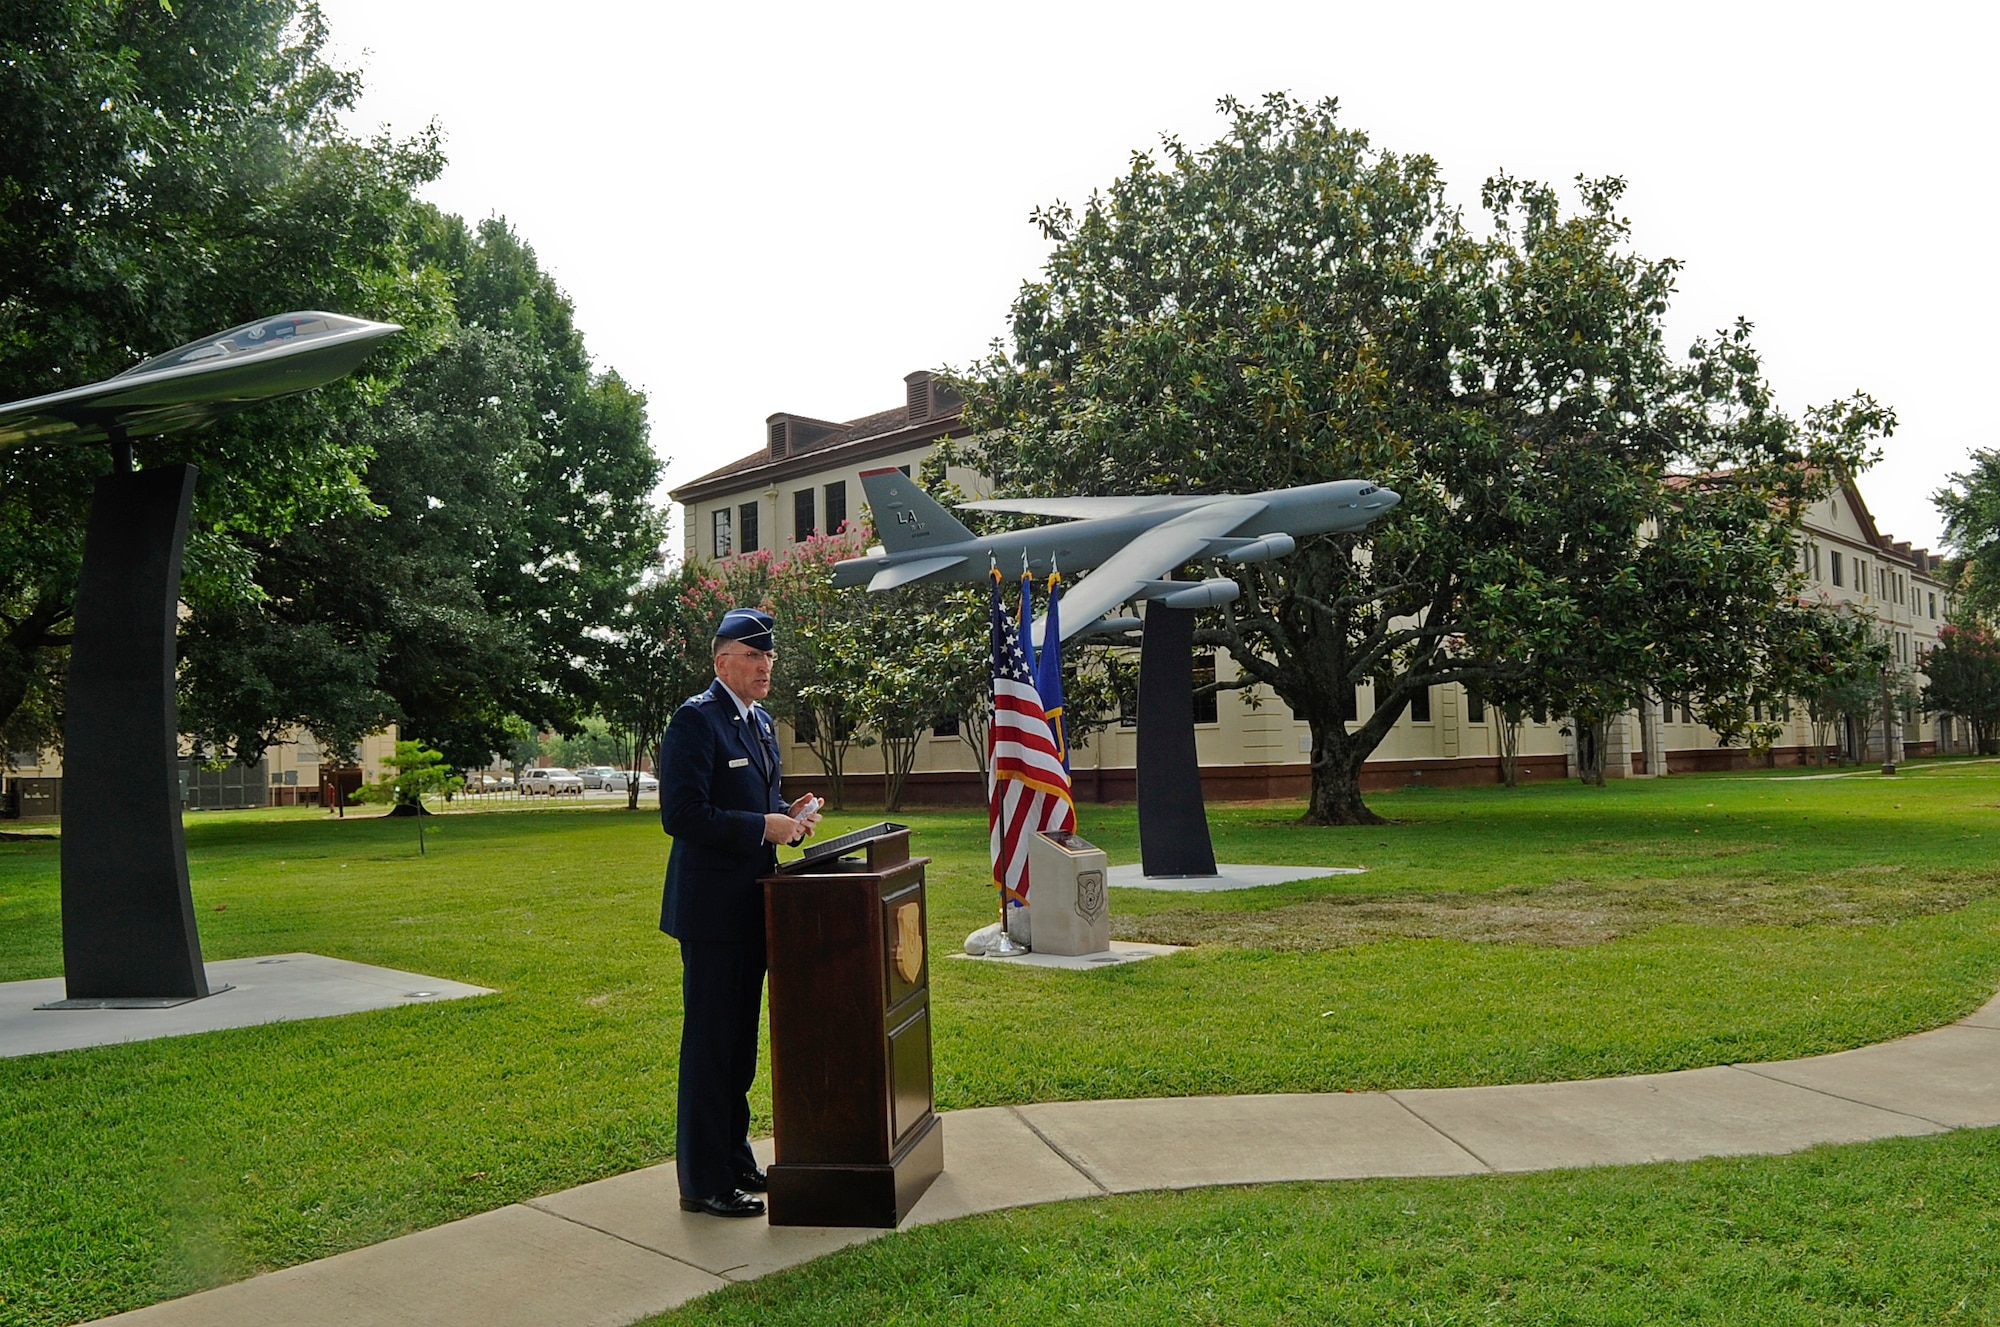 Maj. Gen. Scott Vander Hamm, Eighth Air Force commander, gives his remarks during the Eighth Air Force grand opening ceremony on Barksdale Air Force Base, La., July 2, 2014. The 77,000 sq. ft. building will hold Eighth Air Force staff, Task Force 204 and 608th Air Operations Center. (U.S. Air Force photo/Senior Airman Kristin High)